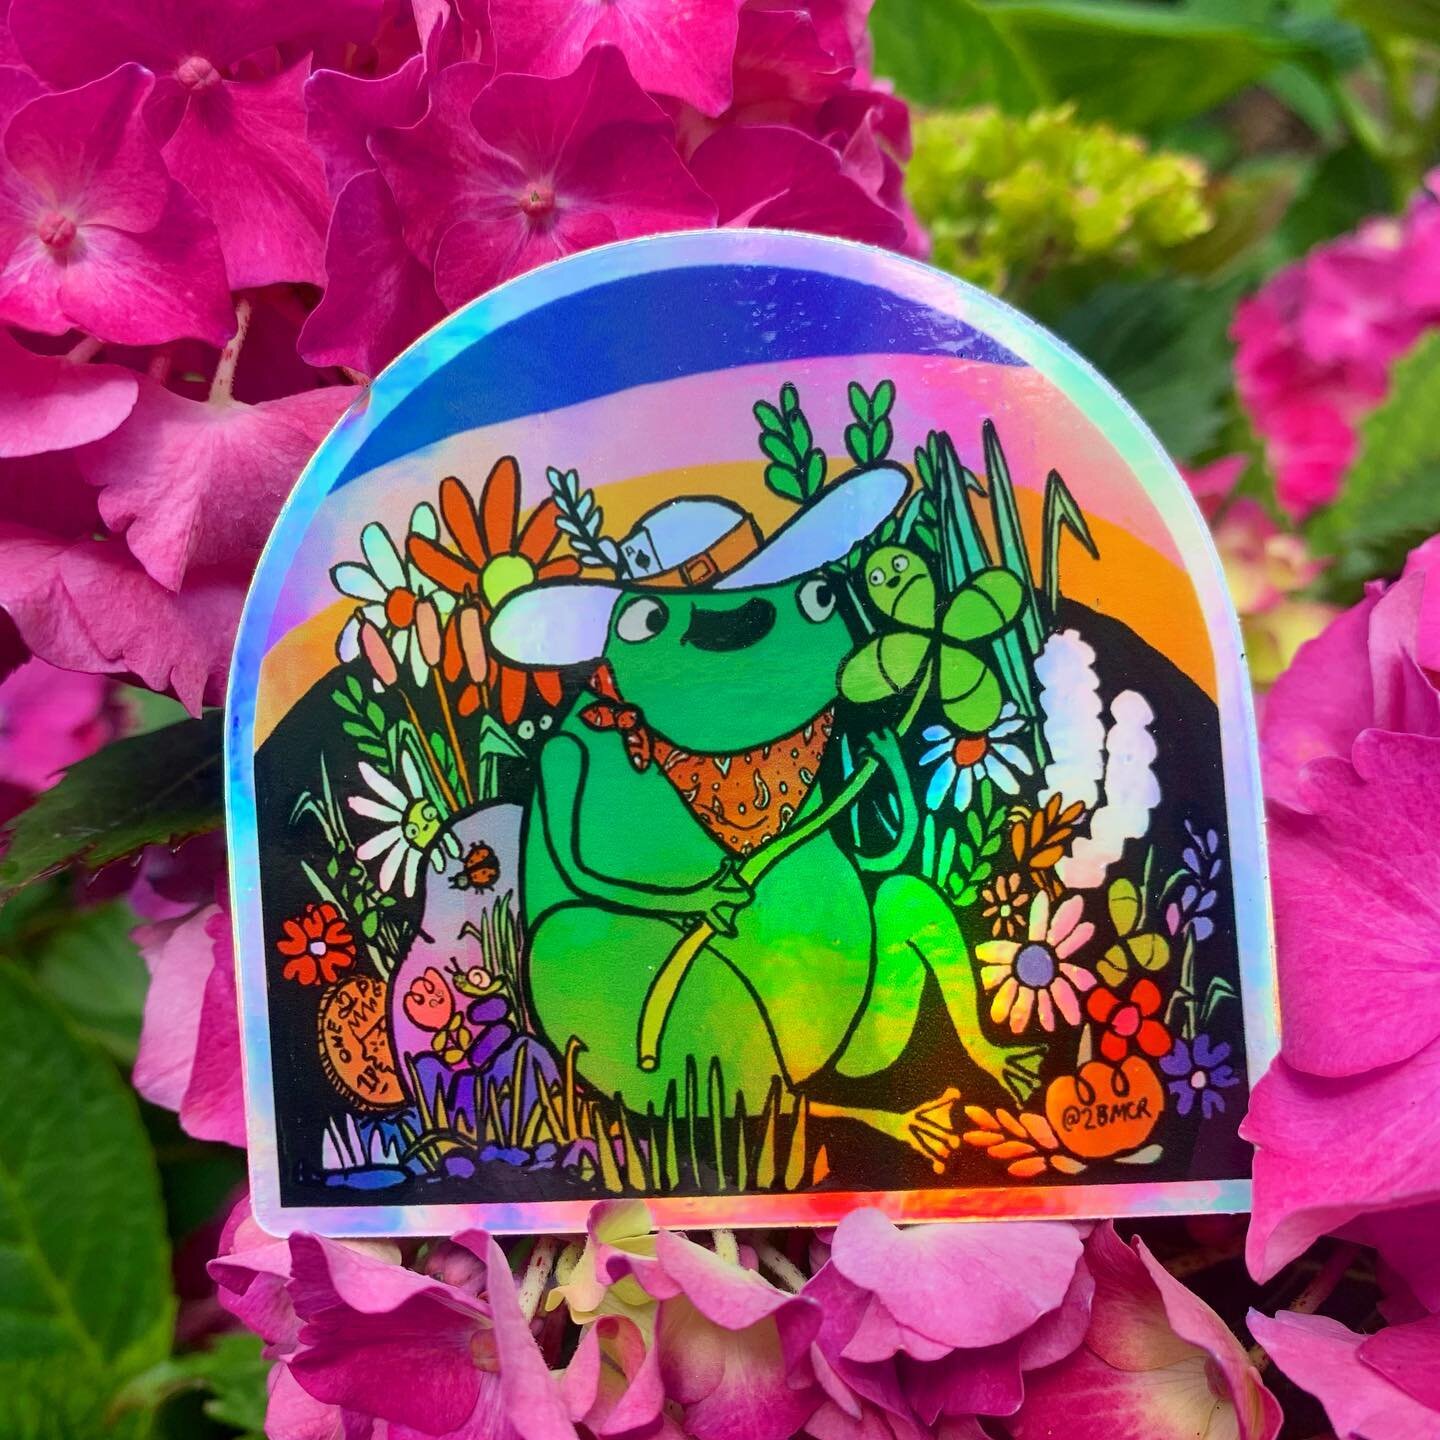 🐸 RETURN OF THE FROGGY KING 👑
Ahh our Good Luck Frog Sticker is back at long last! This lil holographic sticker is so flippin cute, @elsaghk draws the best frogs 😍 This is a vinyl sticker with a delicious holographic effect which makes little rain